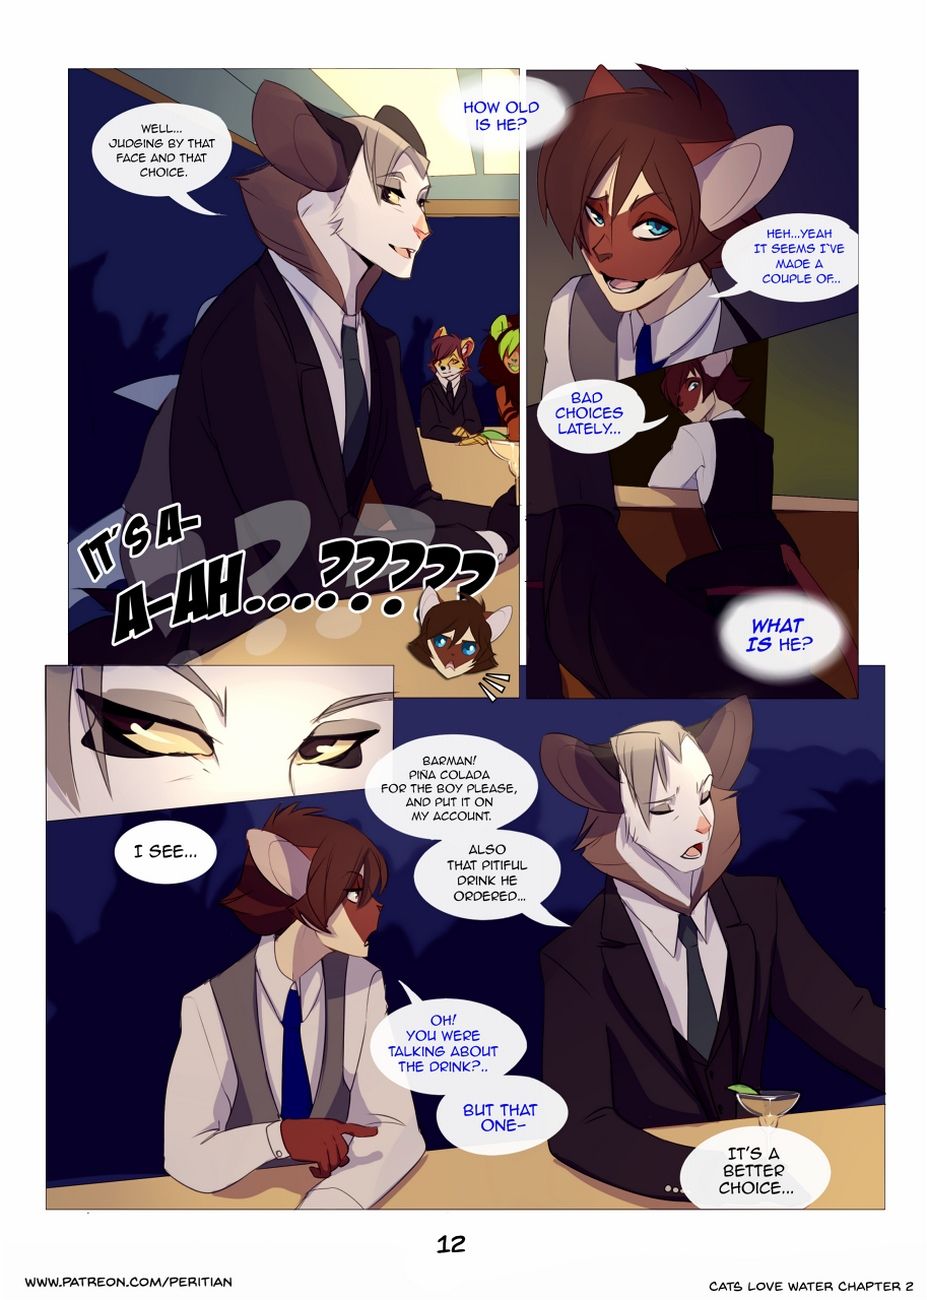 Cats Love Water 2 - part 2 page 1